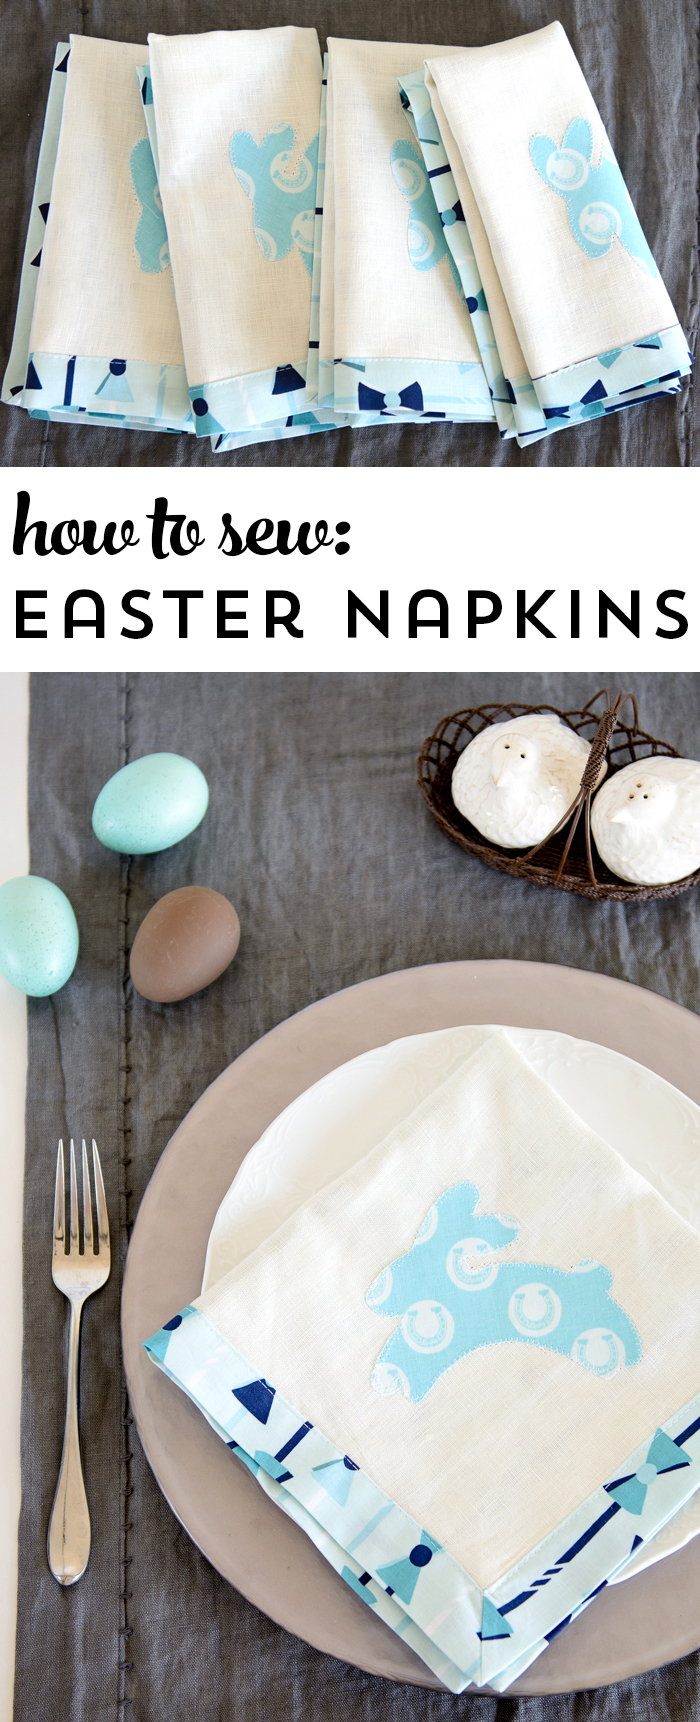 How to Sew Easter Napkins, a free sewing pattern.